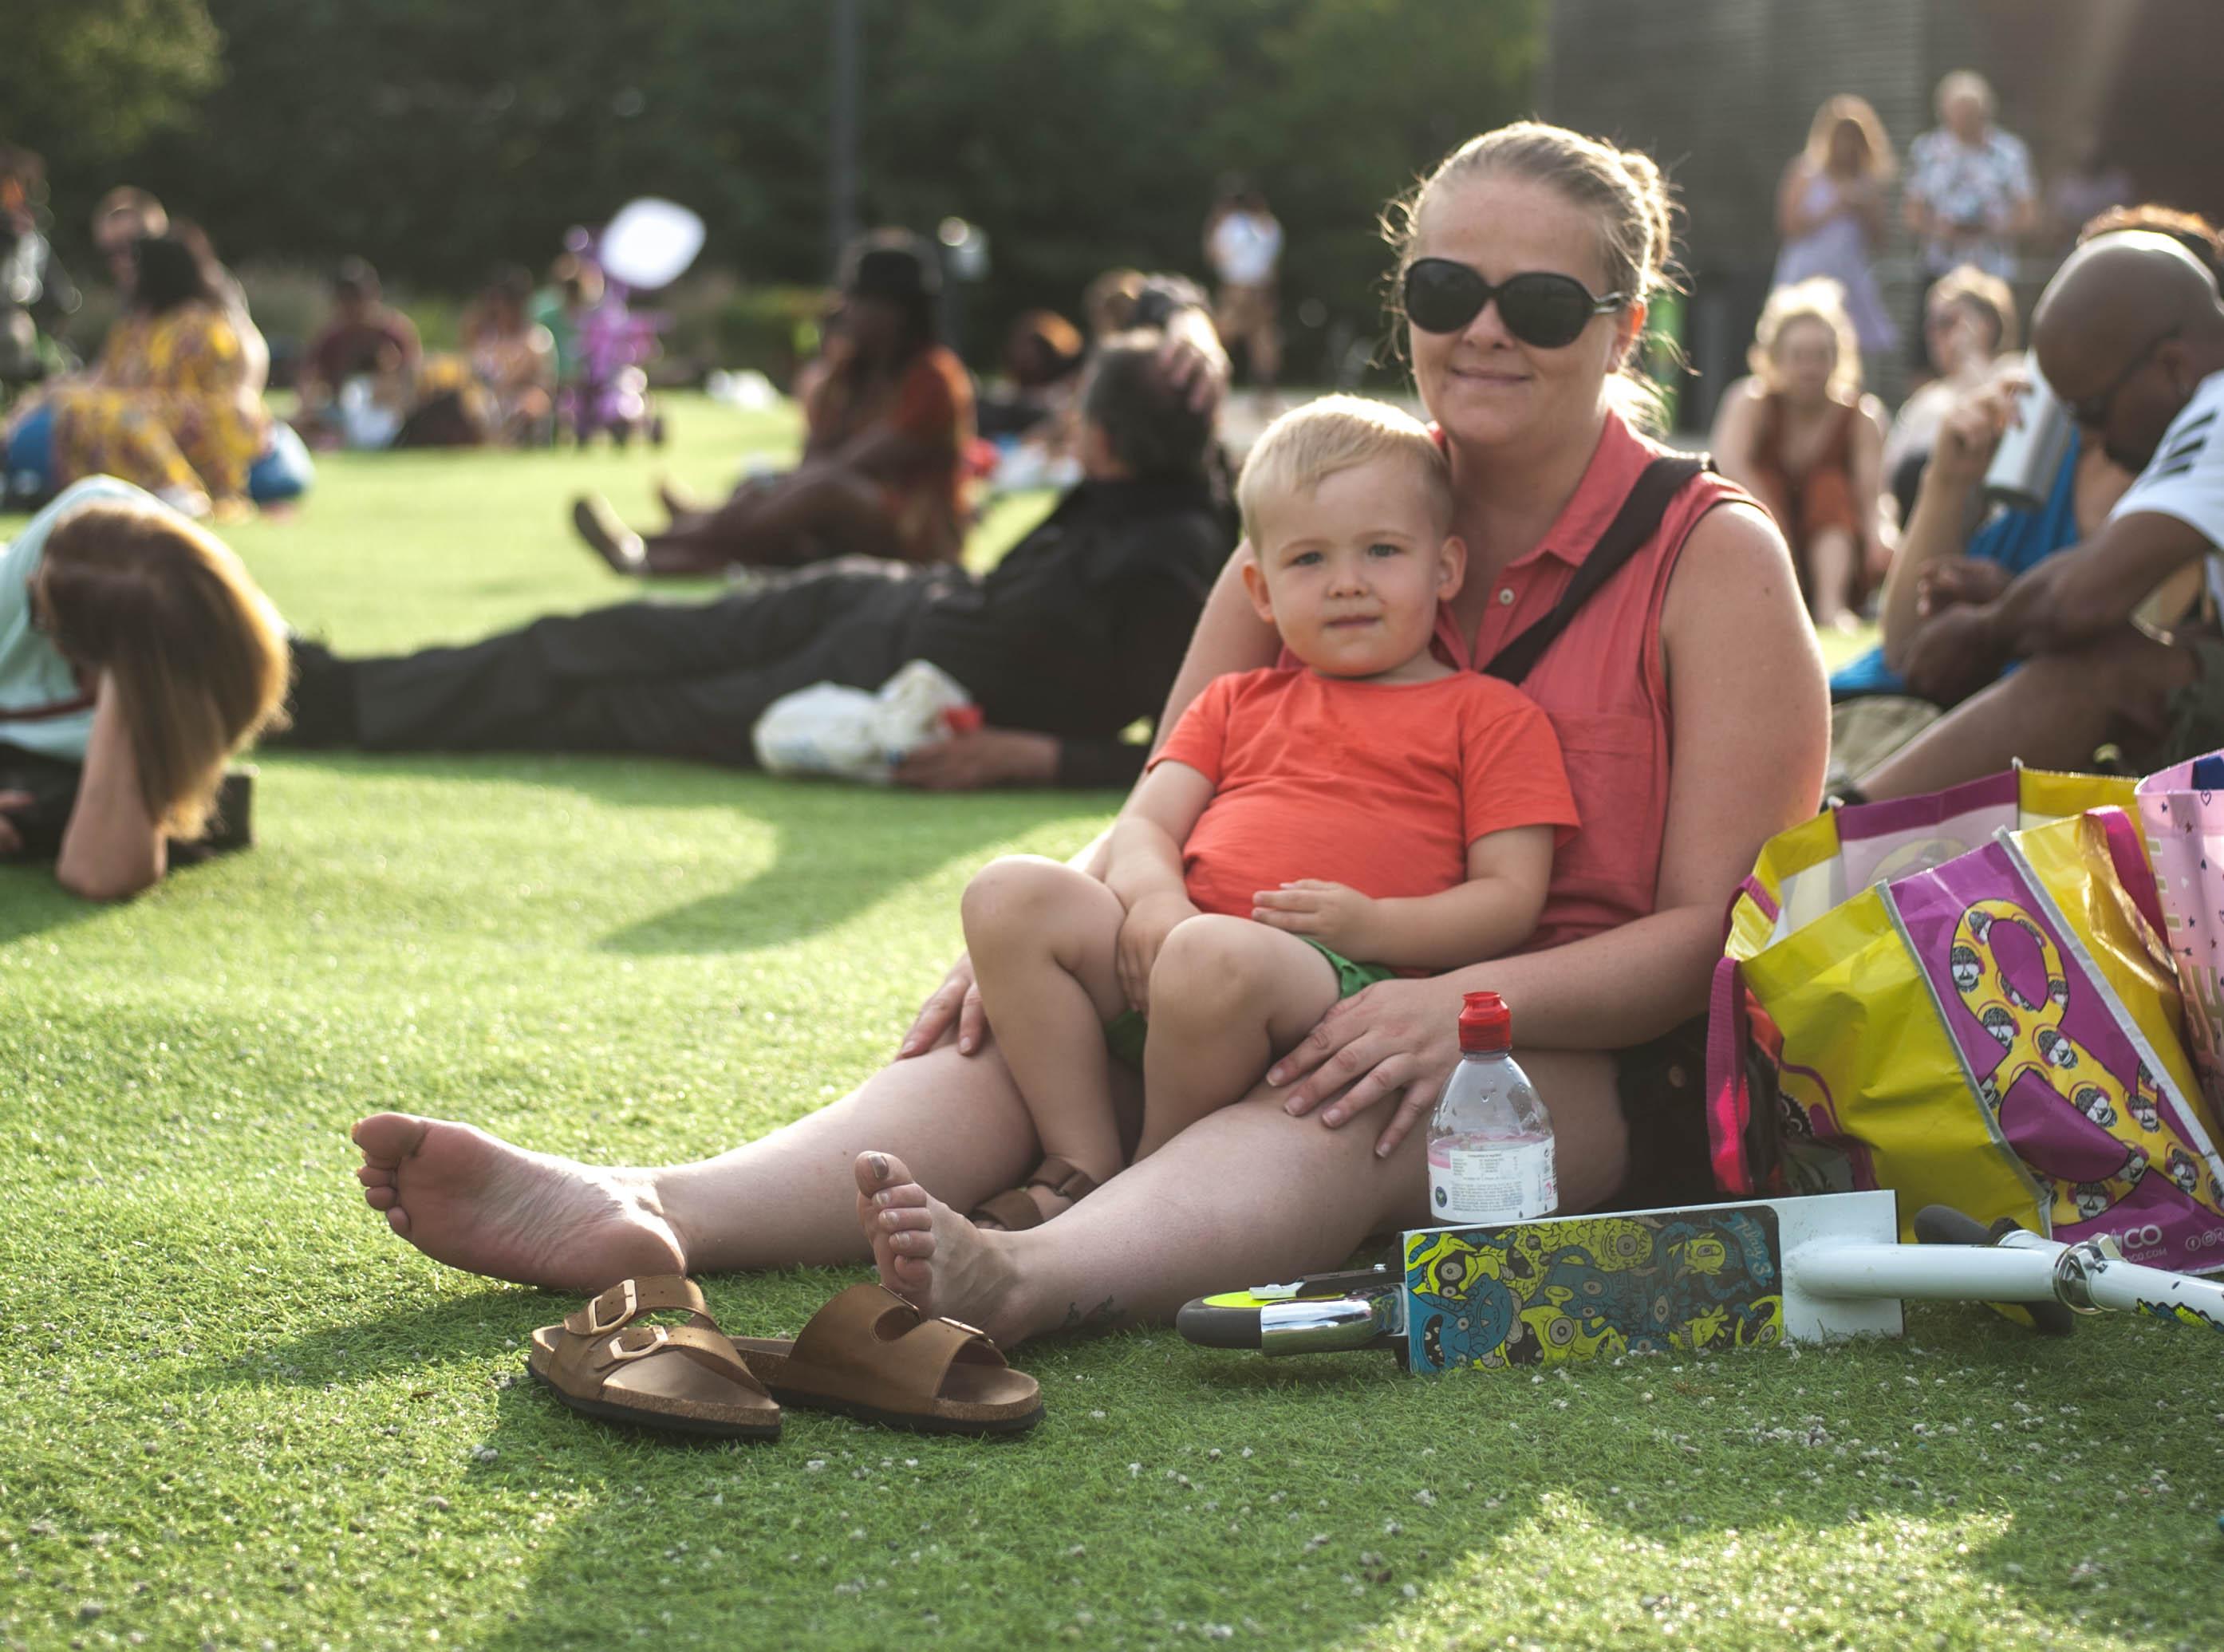 A woman sat with child on the grass